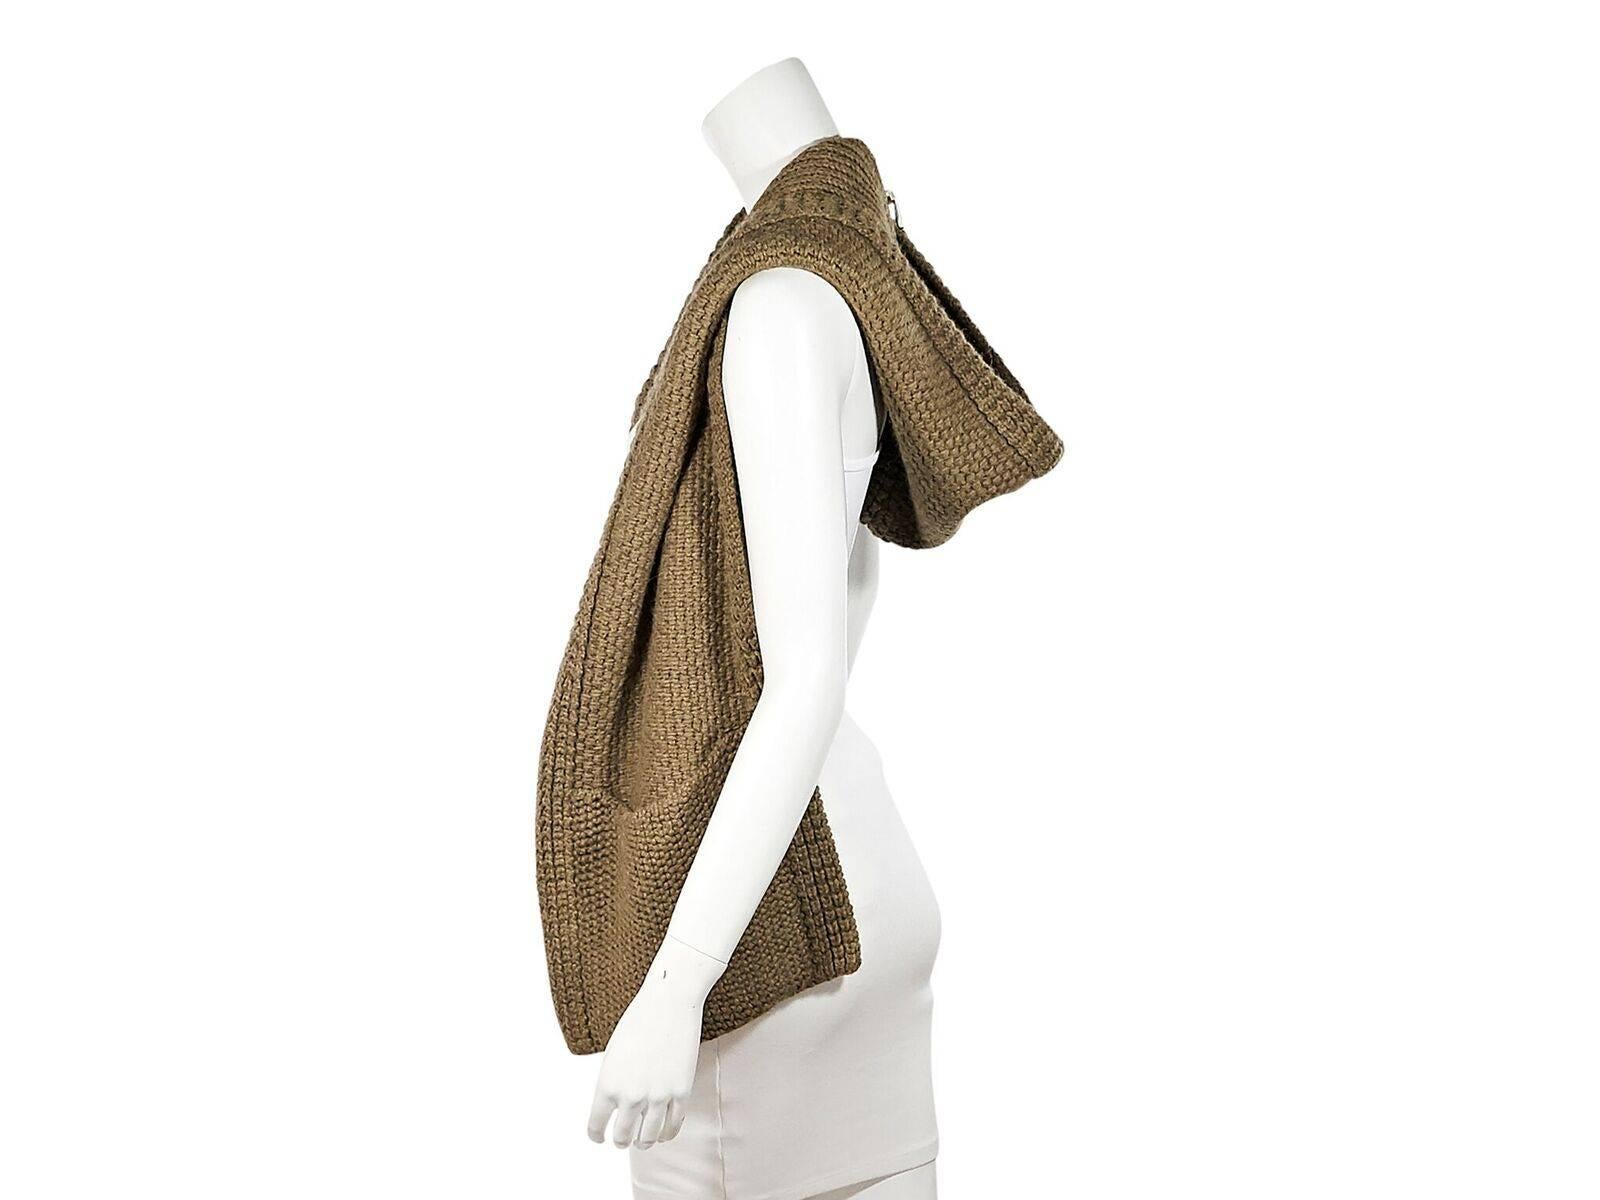 Product details:  Vintage tan alpaca knit snood by Hermes.  Doubles as a vest and scarf.  Hood and slide pockets.  
Condition: Pre-owned. Very good. 
Est. Retail $1,198